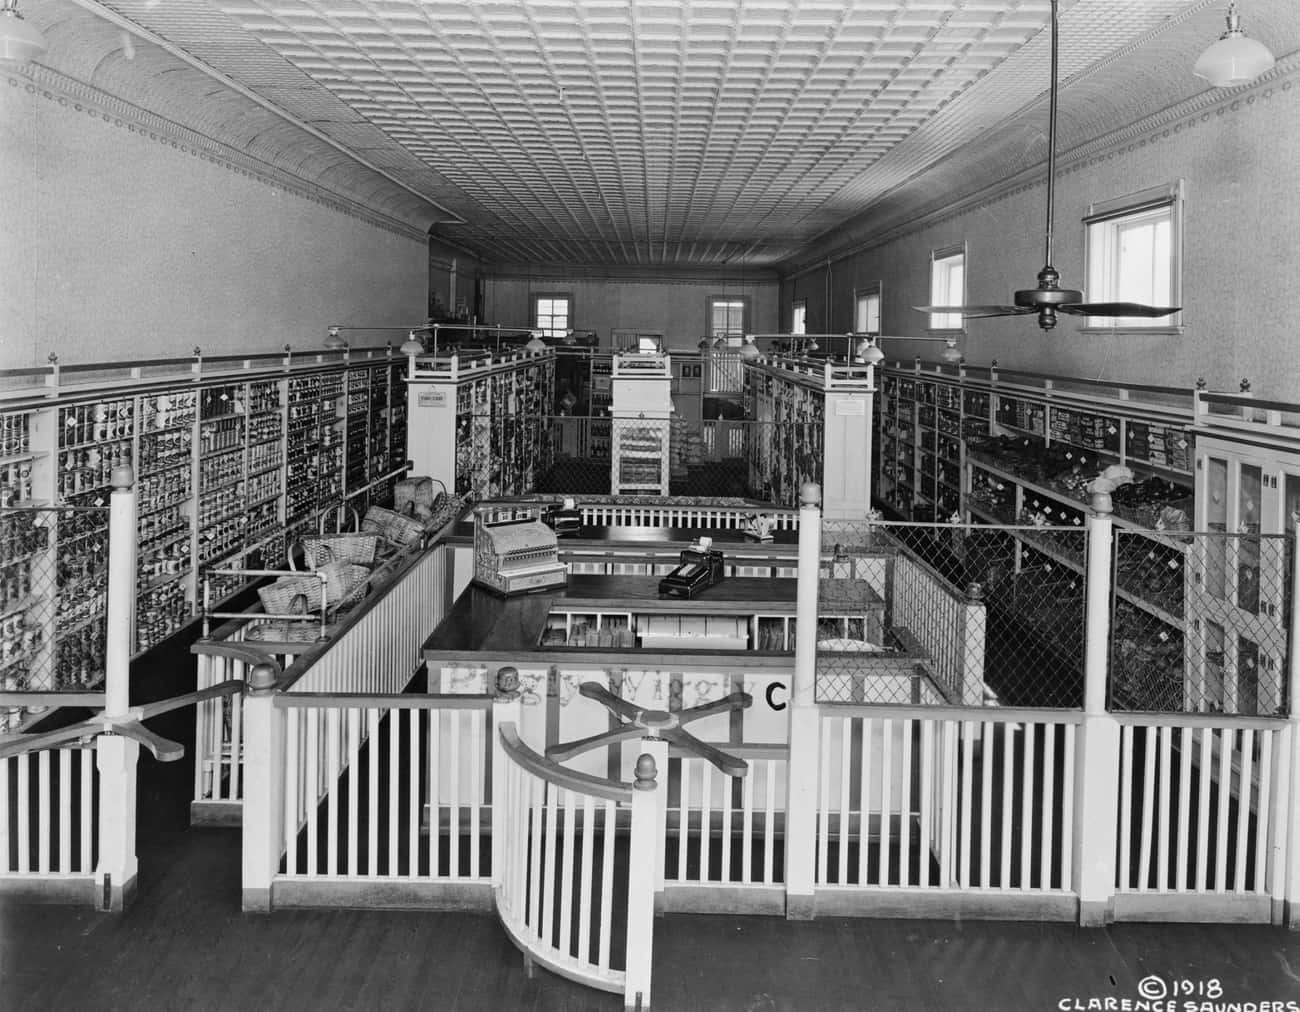 Piggly Wiggly, Memphis, Tennessee, 1918